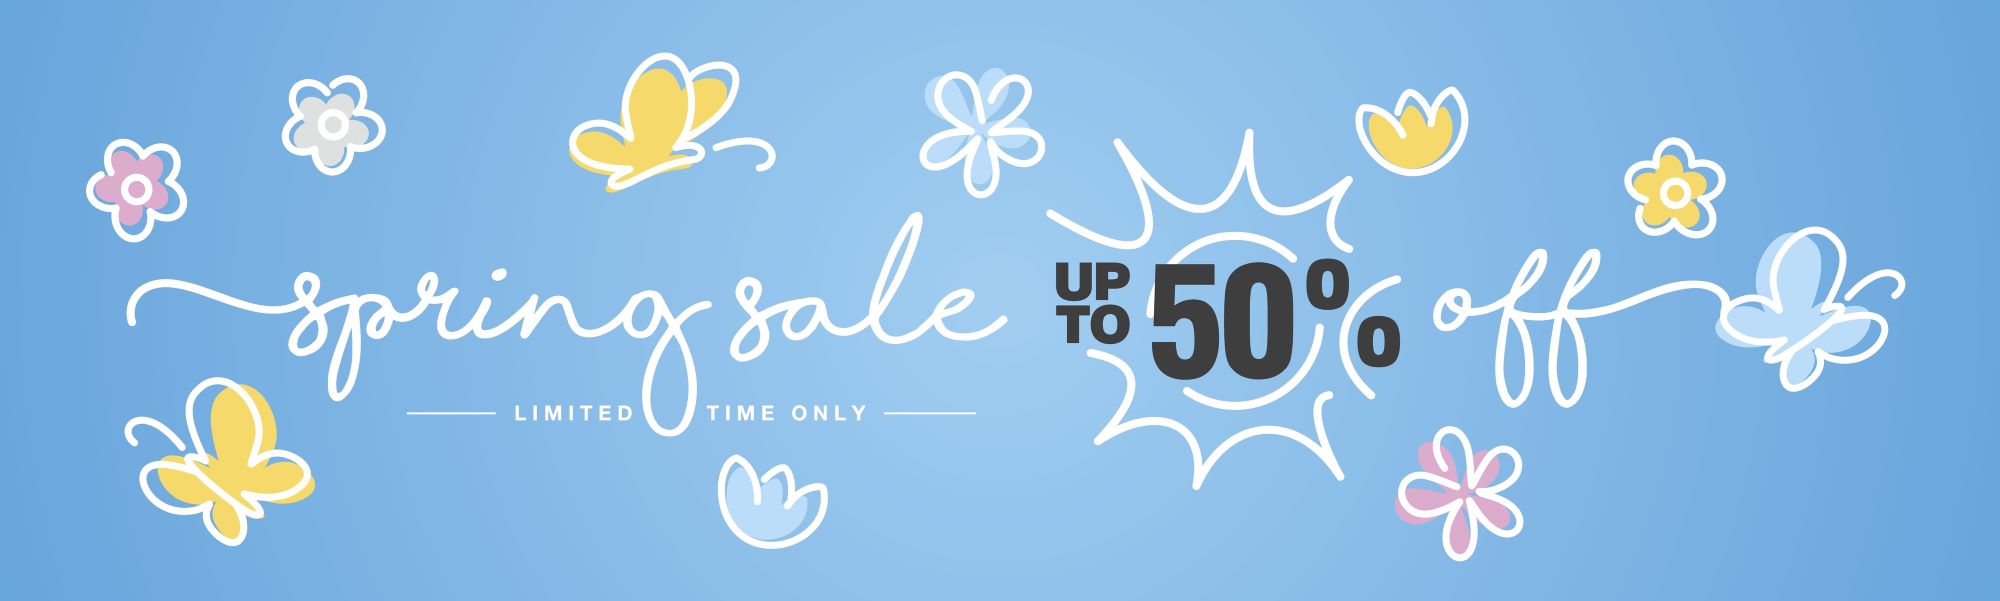 Rest Relax spring sale banner